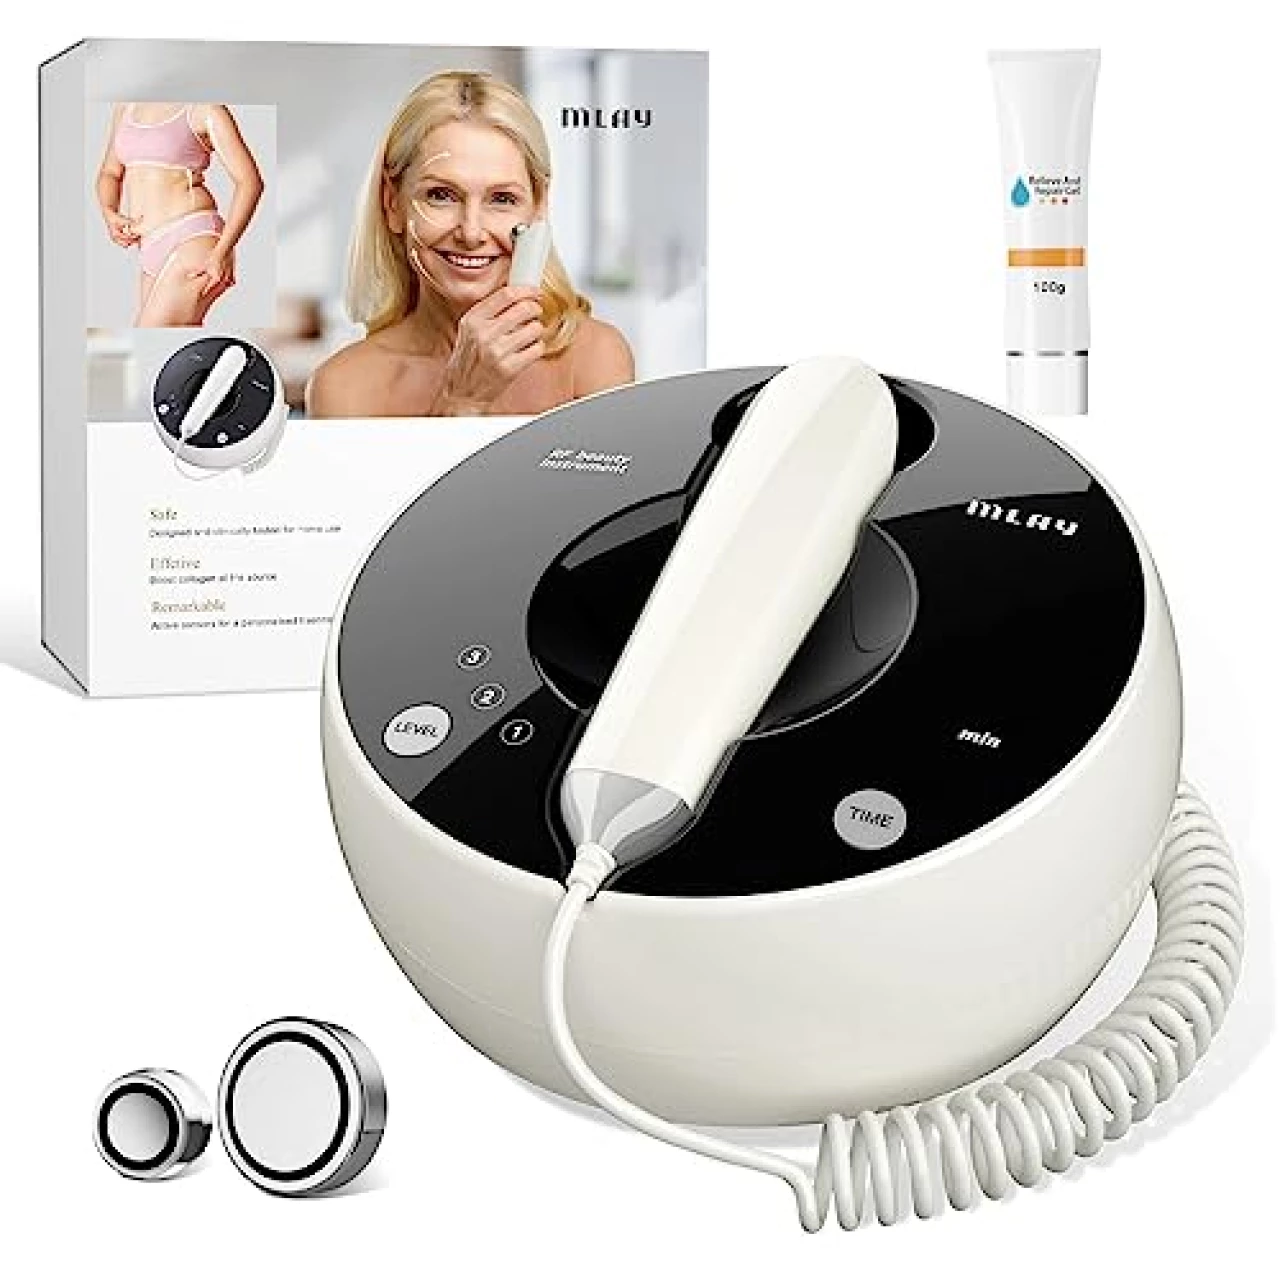 RF Beauty Device | Home RF Lifting | Wrinkle Removal | Anti Aging | Skin Care - Increase Collagen &amp; Absorption - MLAY Professional Radio Frequency Skin Tightening for Face and Body - Salon Effects